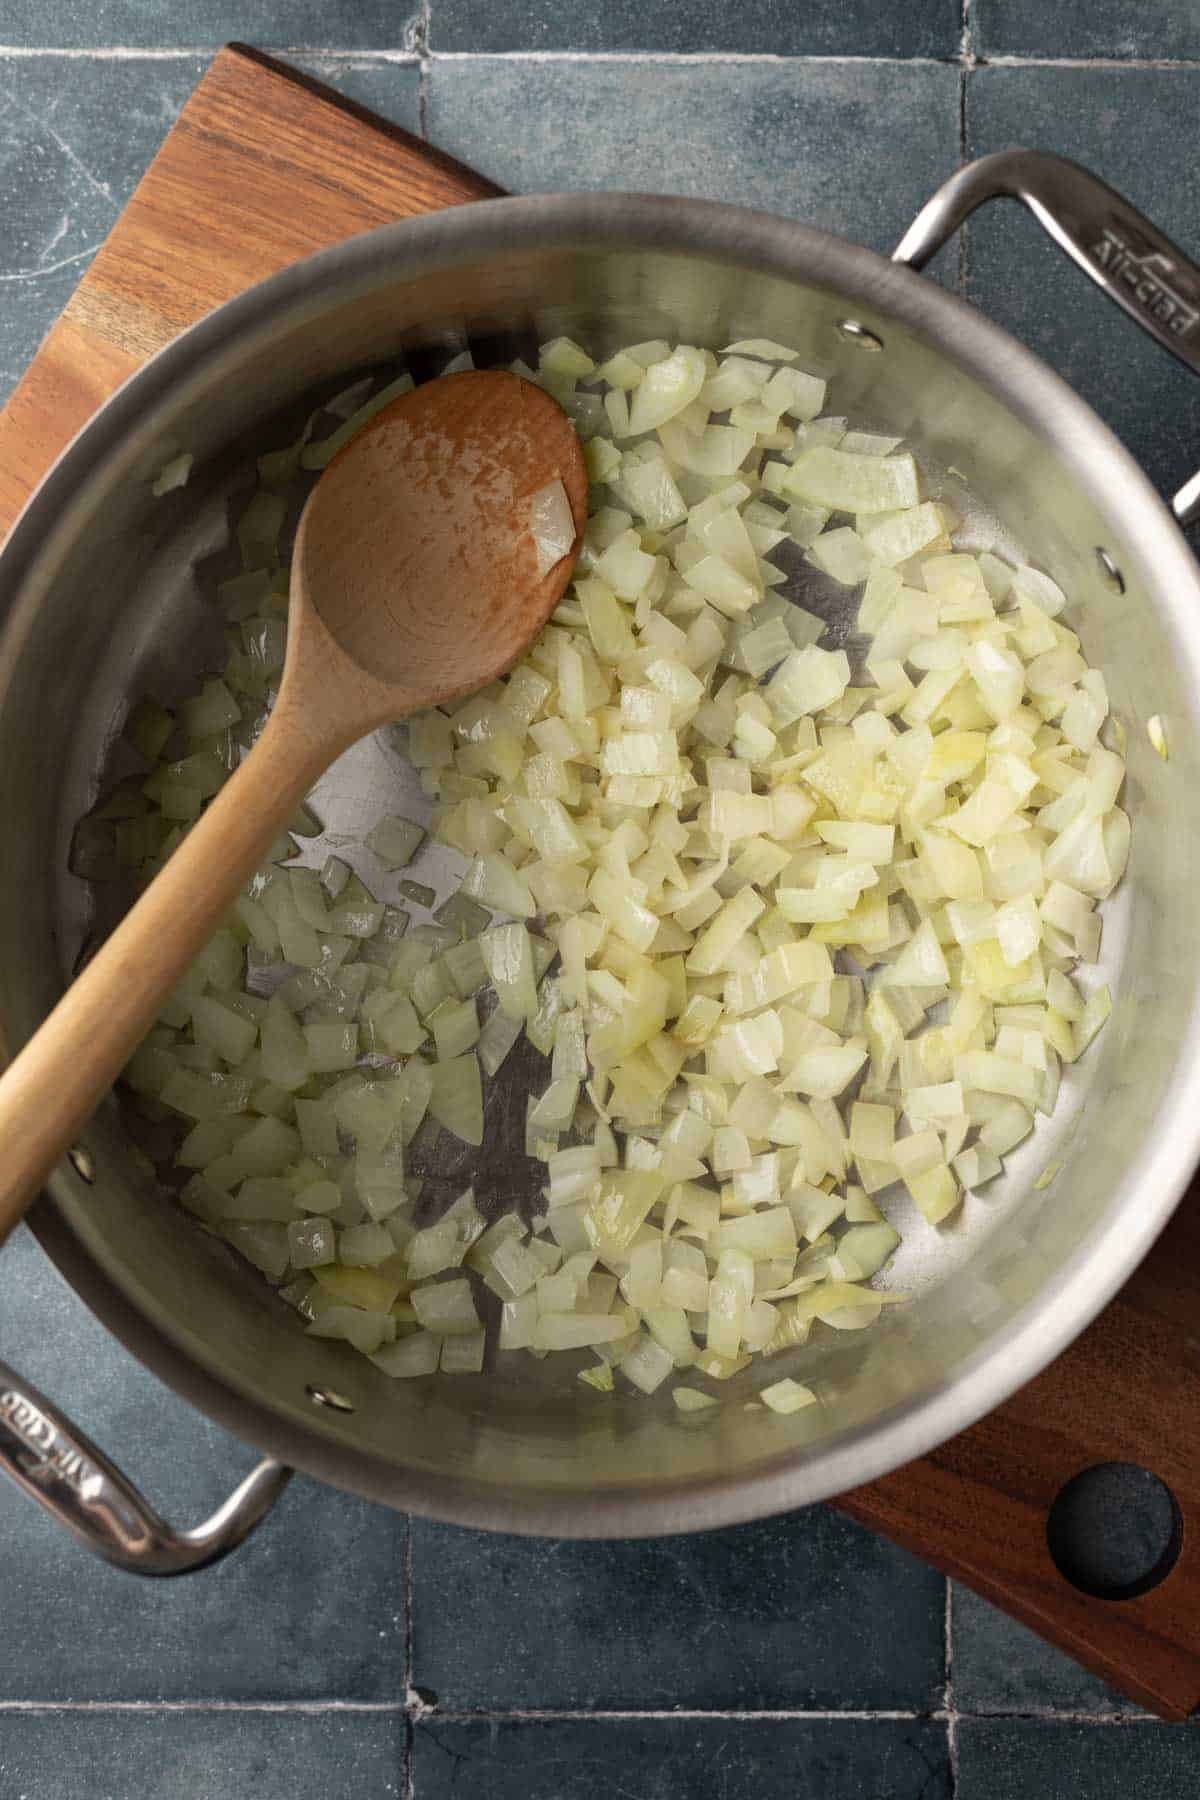 Sauteing onion in oil to create the base of the soup.